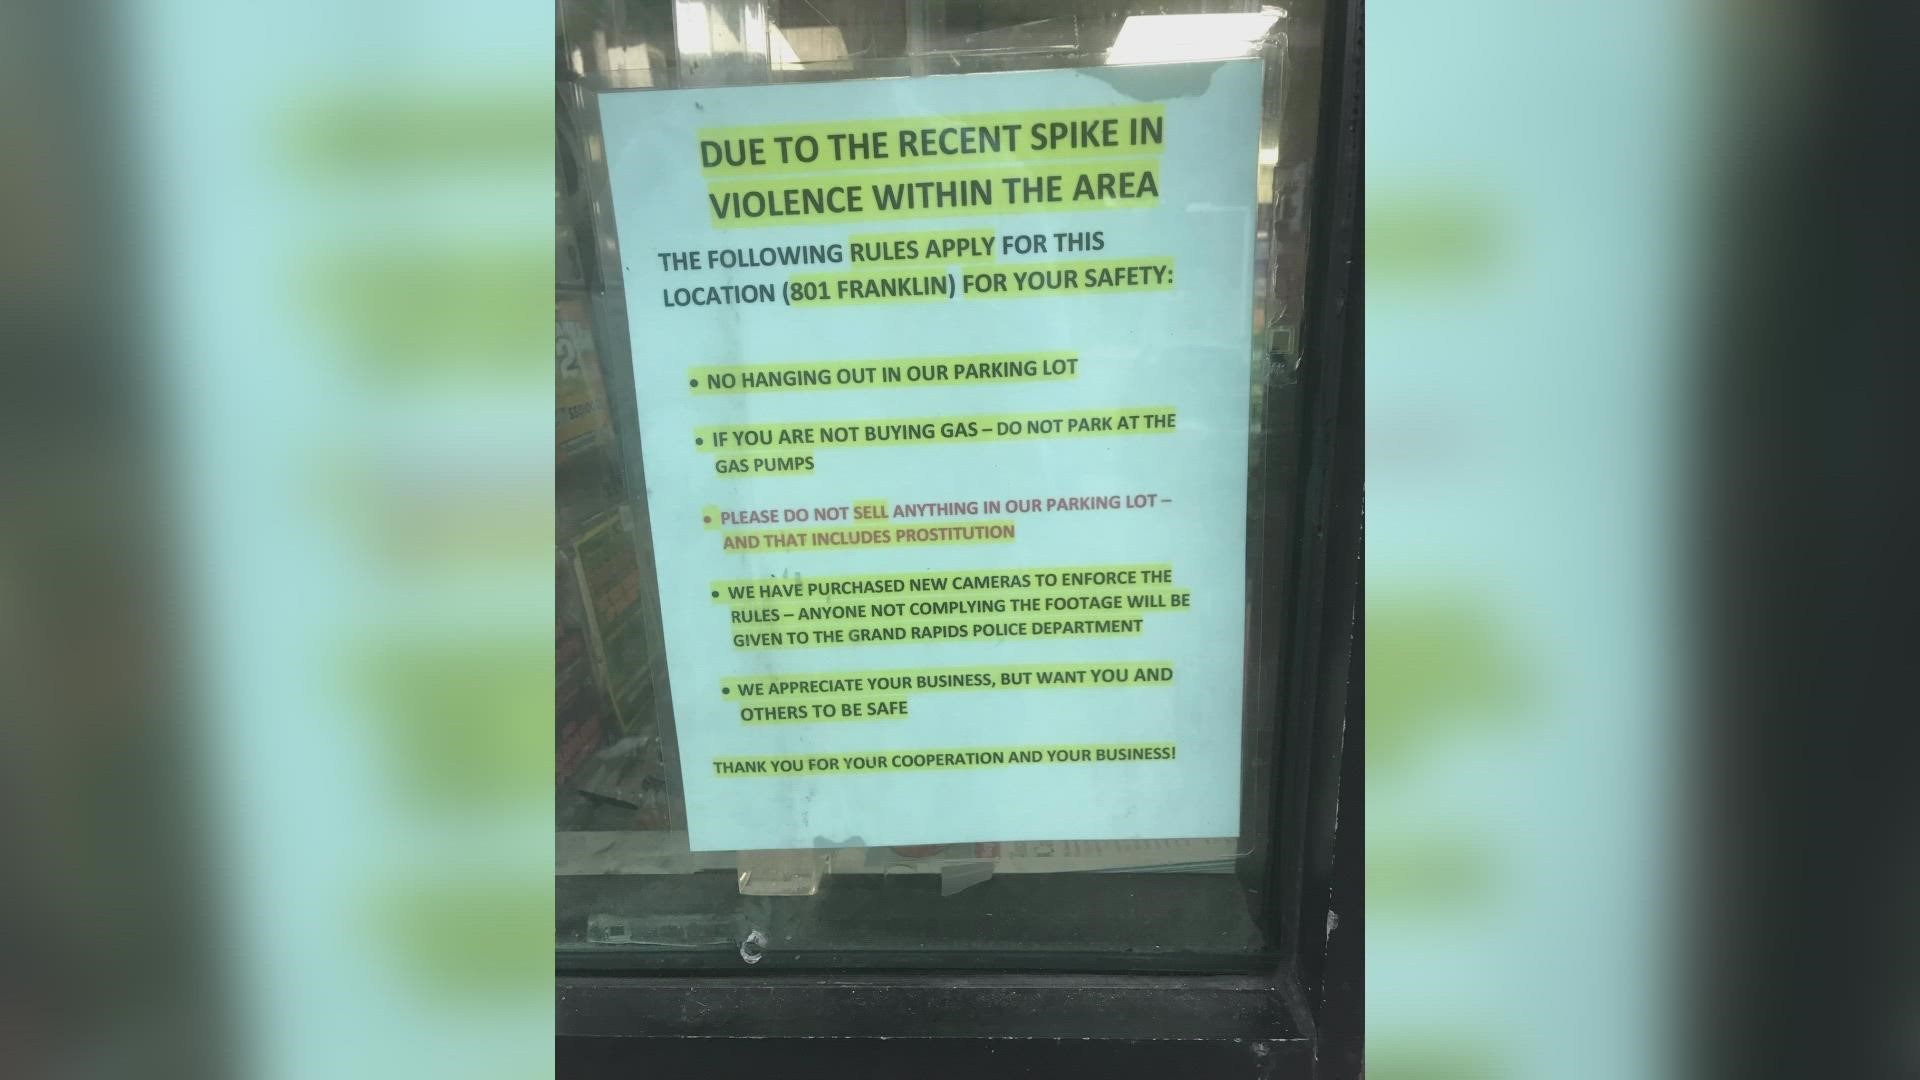 A sign was put on the front door of a gas station in Grand Rapids in an effort to reduce 'a recent spike in violence' in the area.